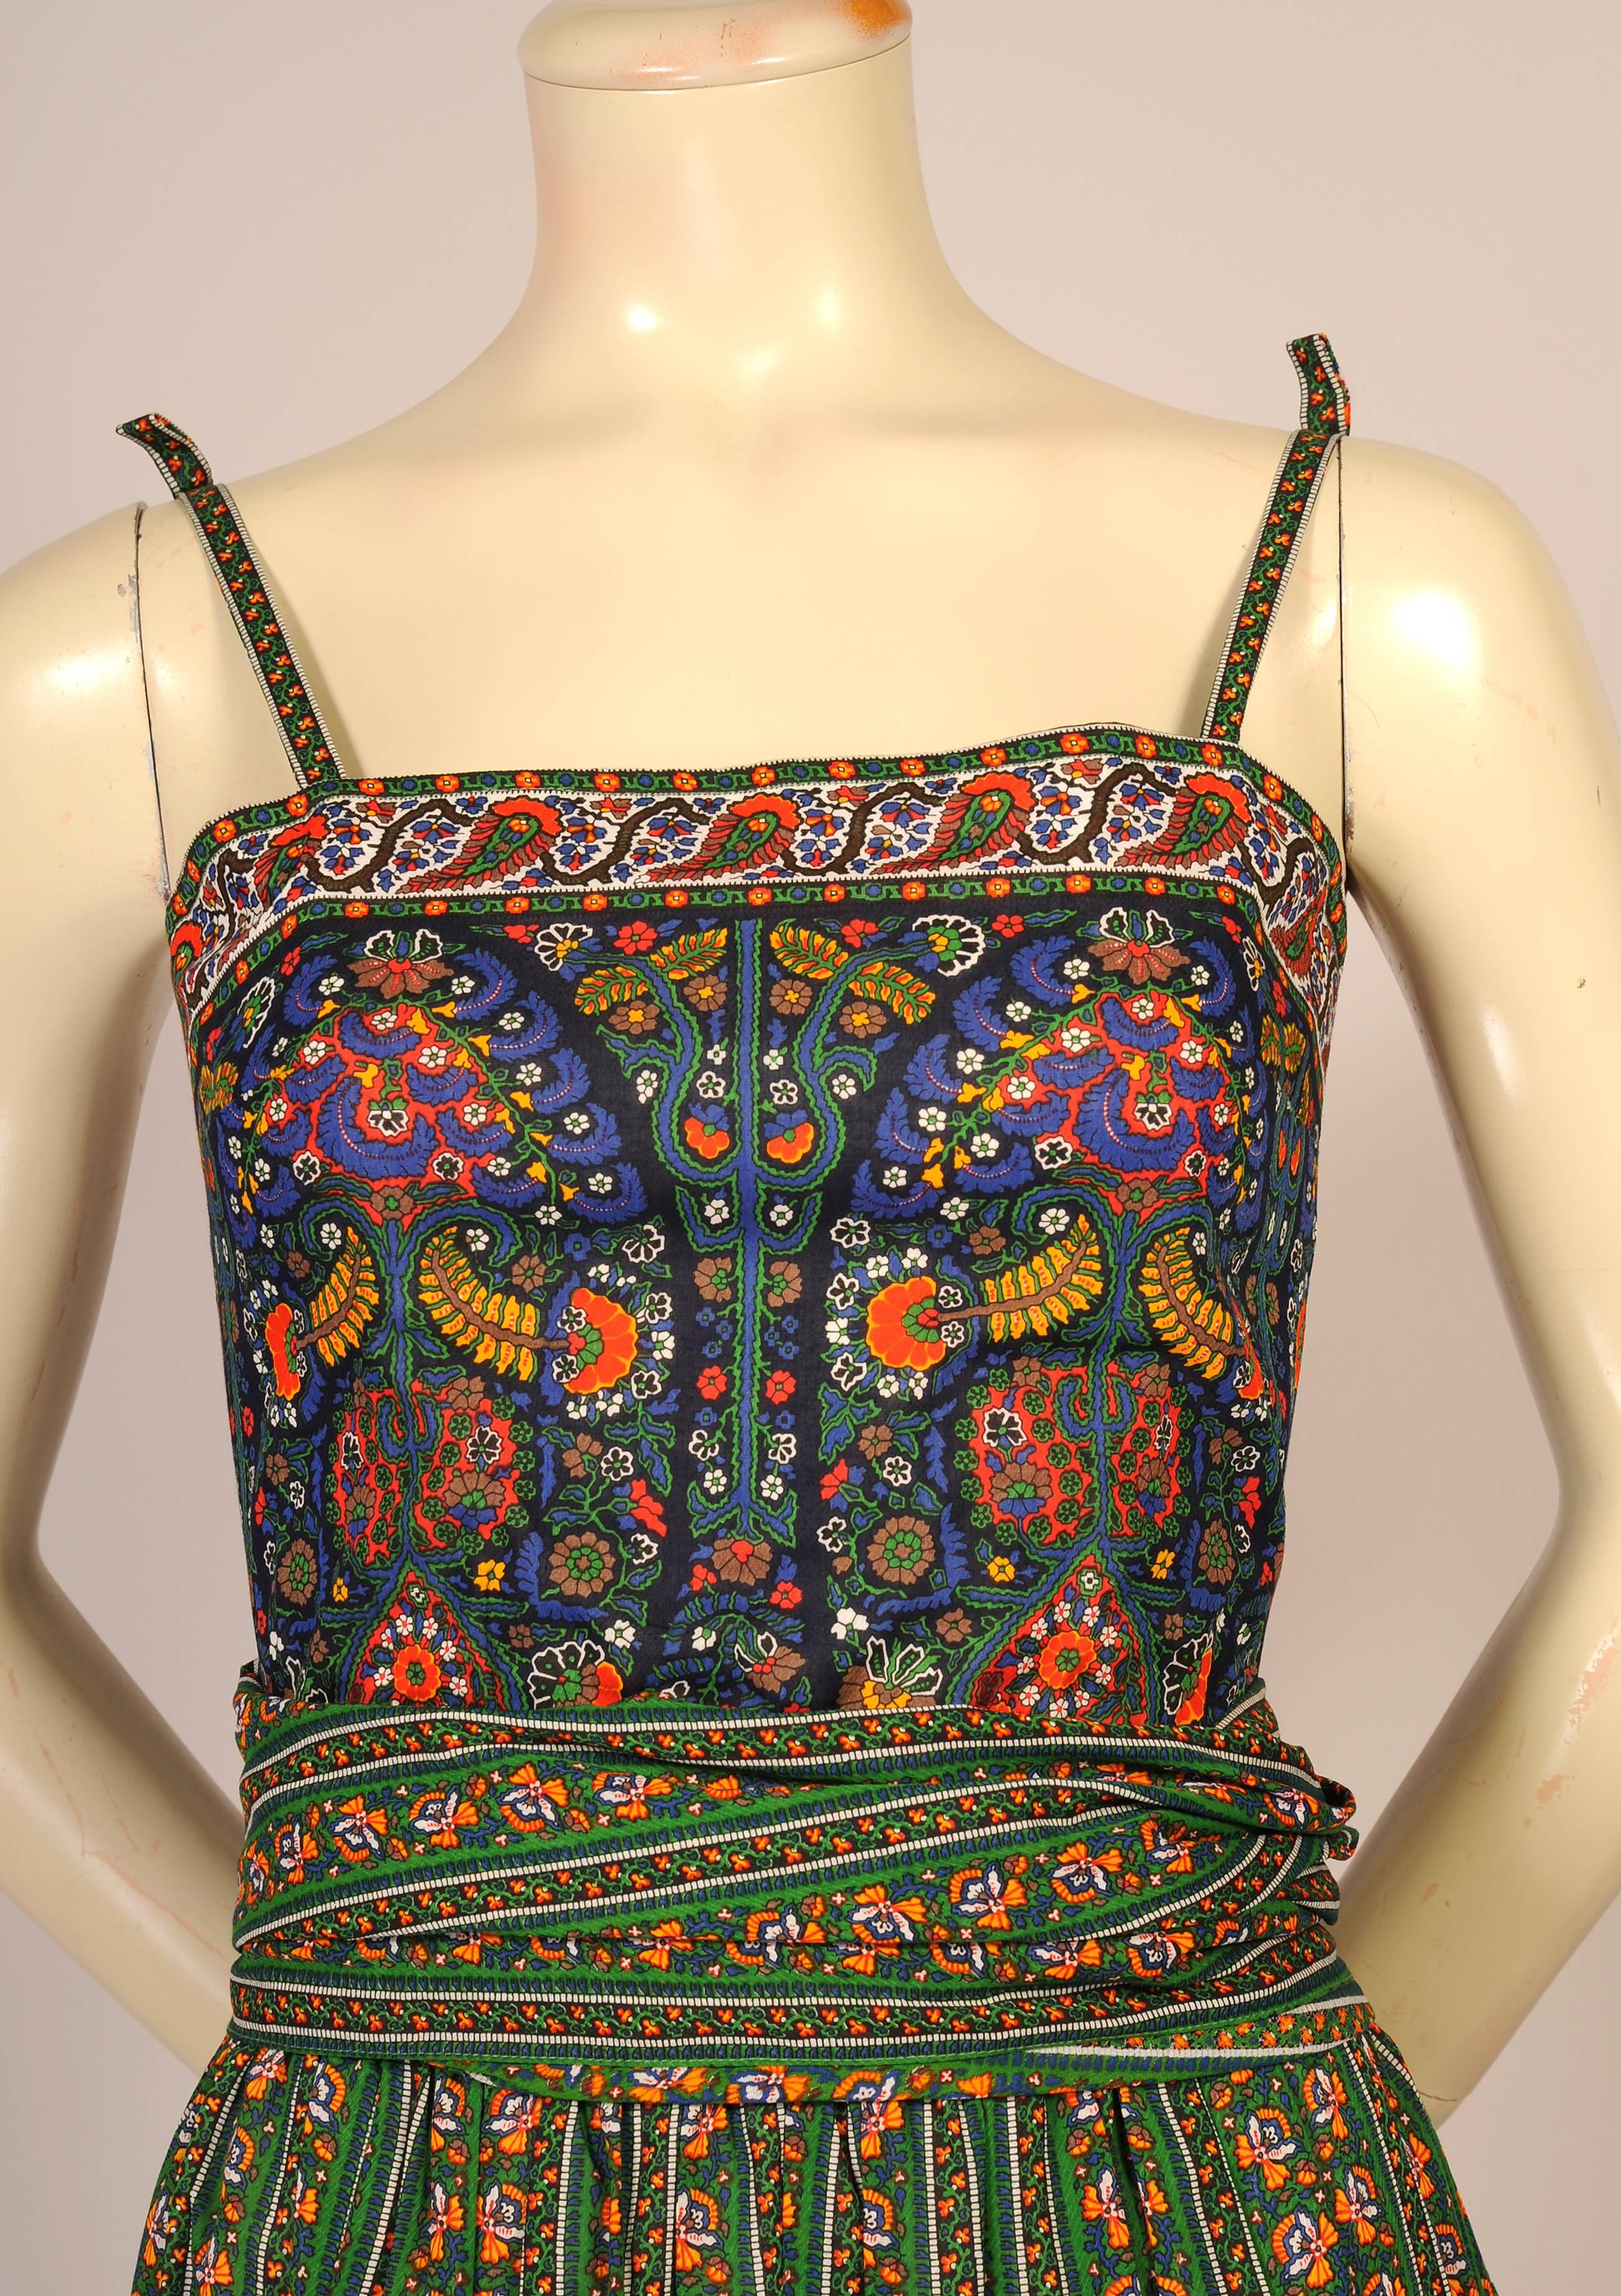 Tina Leser used a colorful cotton border print from the South of France for this charming two piece dress and shawl. The boned camisole style top is cut entirely from the border print. It has narrow straps with decorative bows, a center back metal